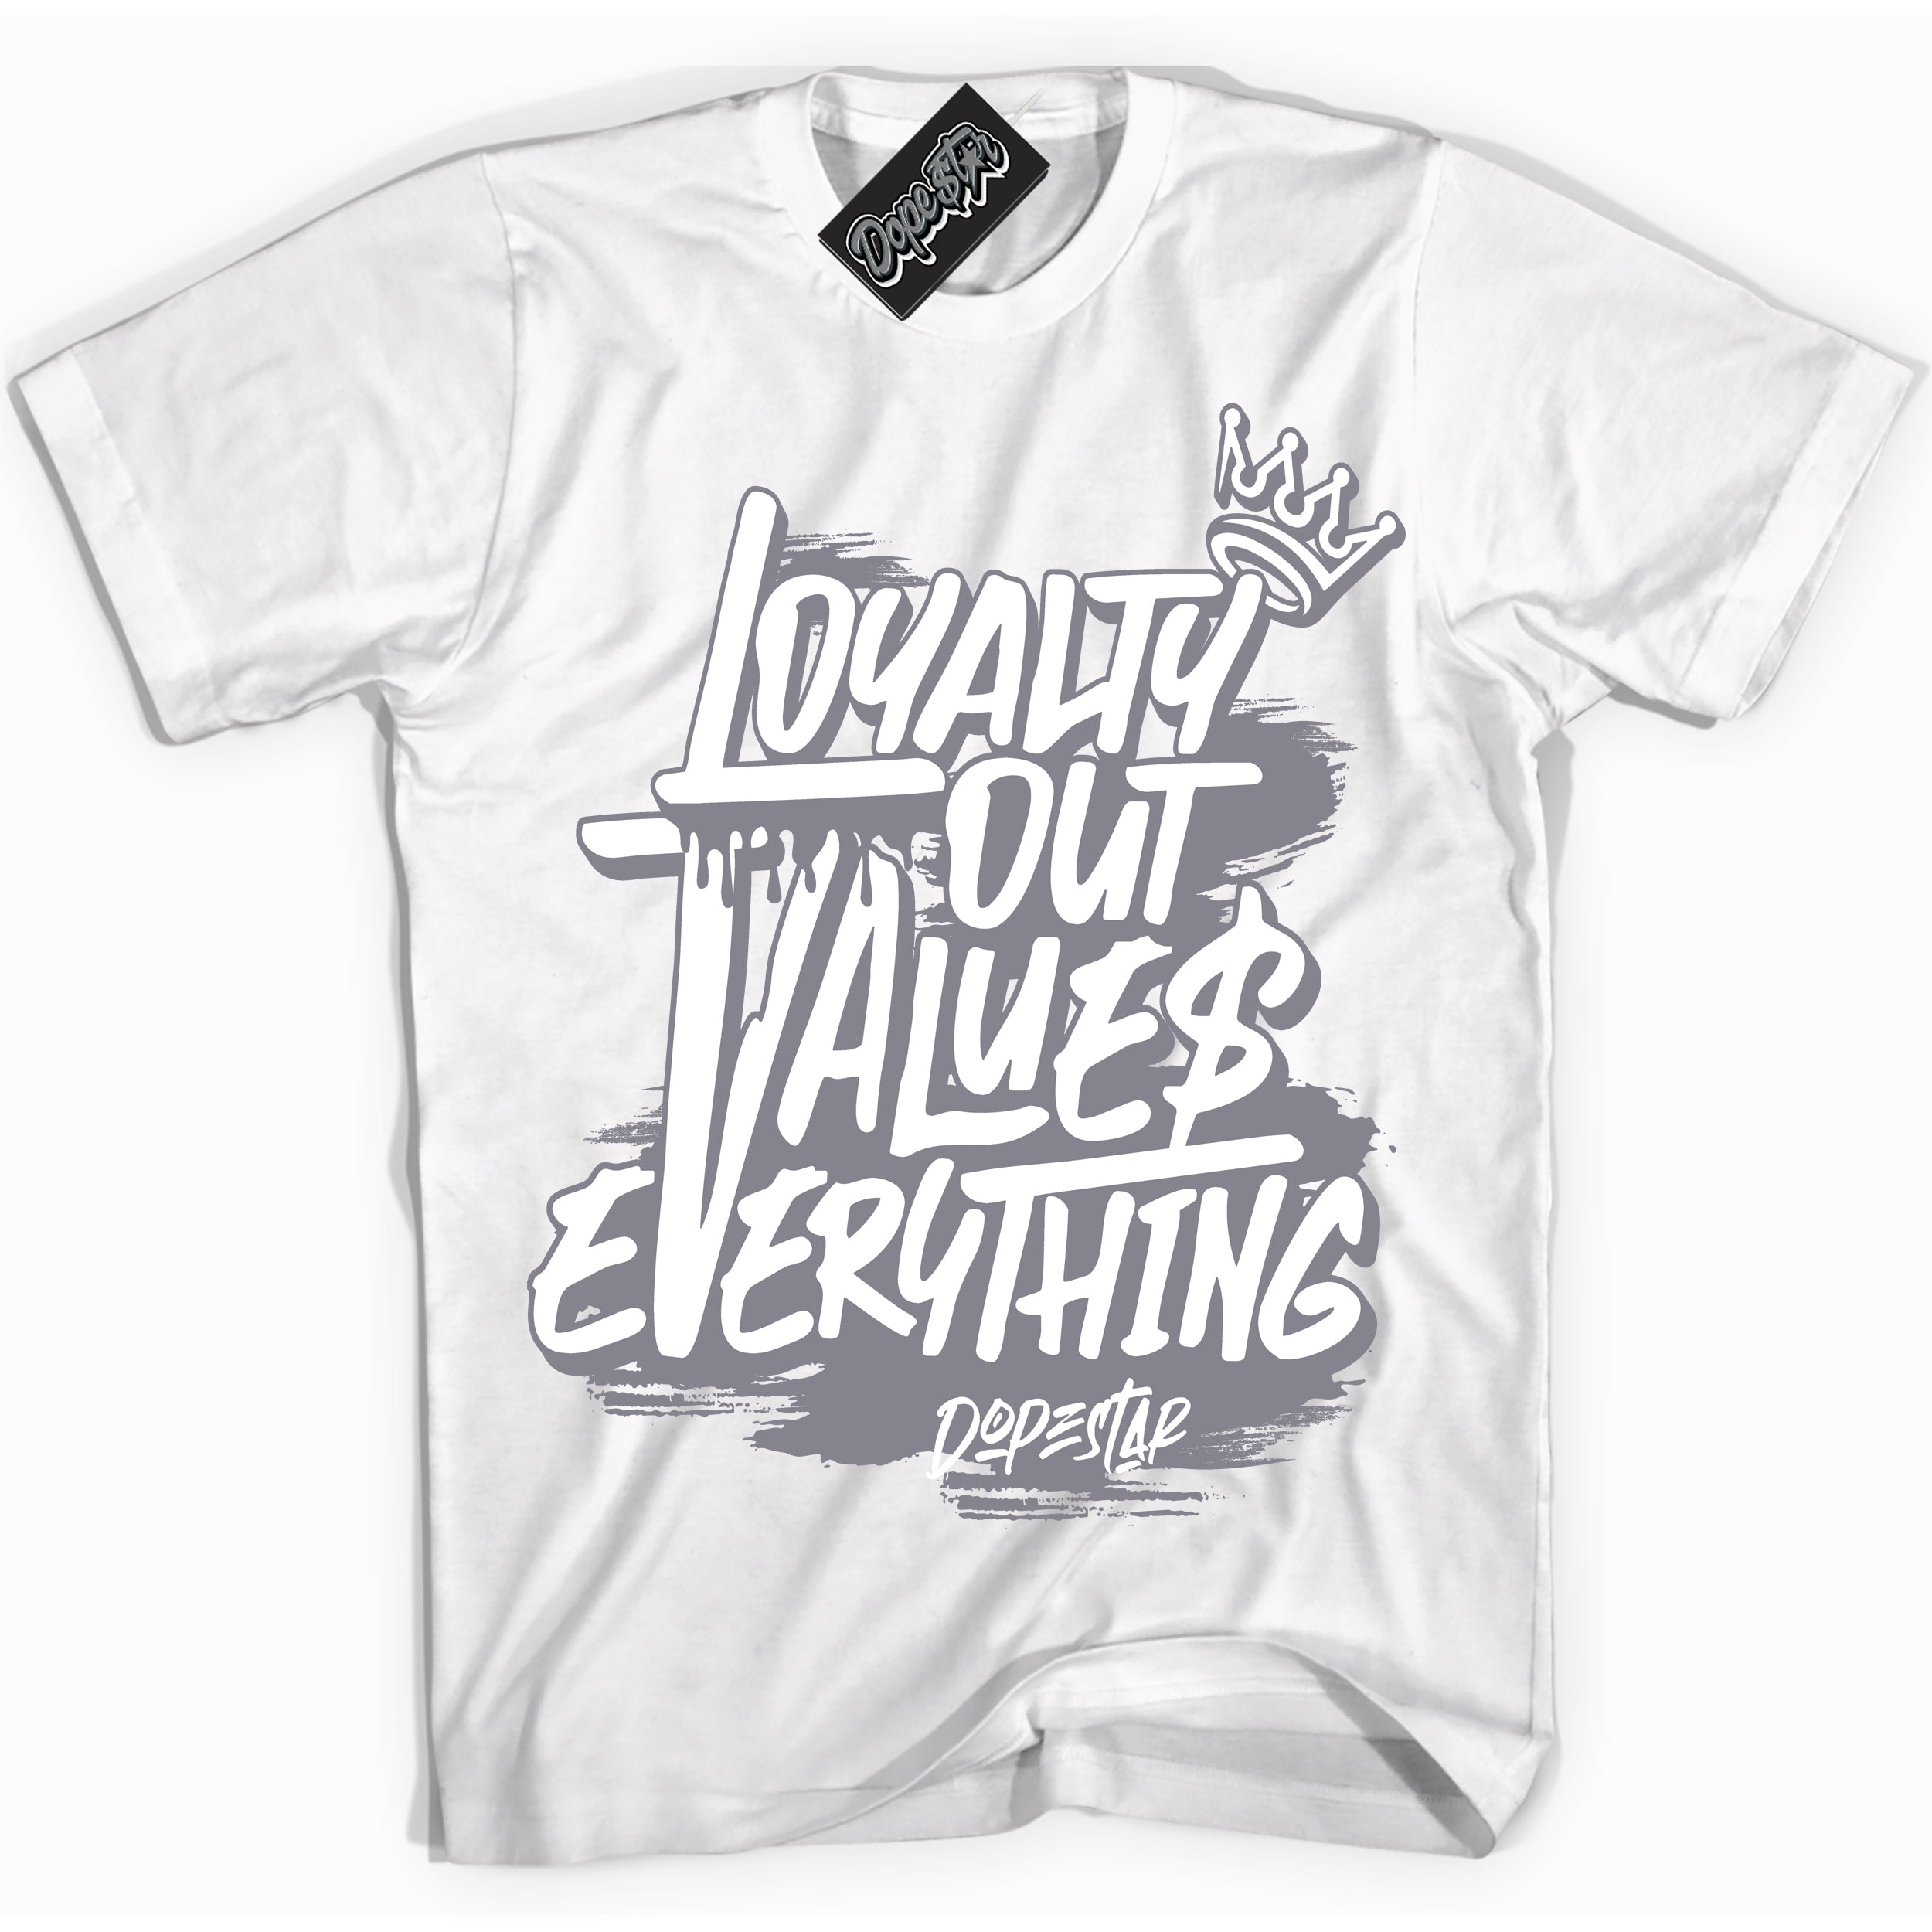 Cool White Shirt with “ Loyalty Out Values Everything” design that perfectly matches Vintage Stealth Grey 1s Sneakers.